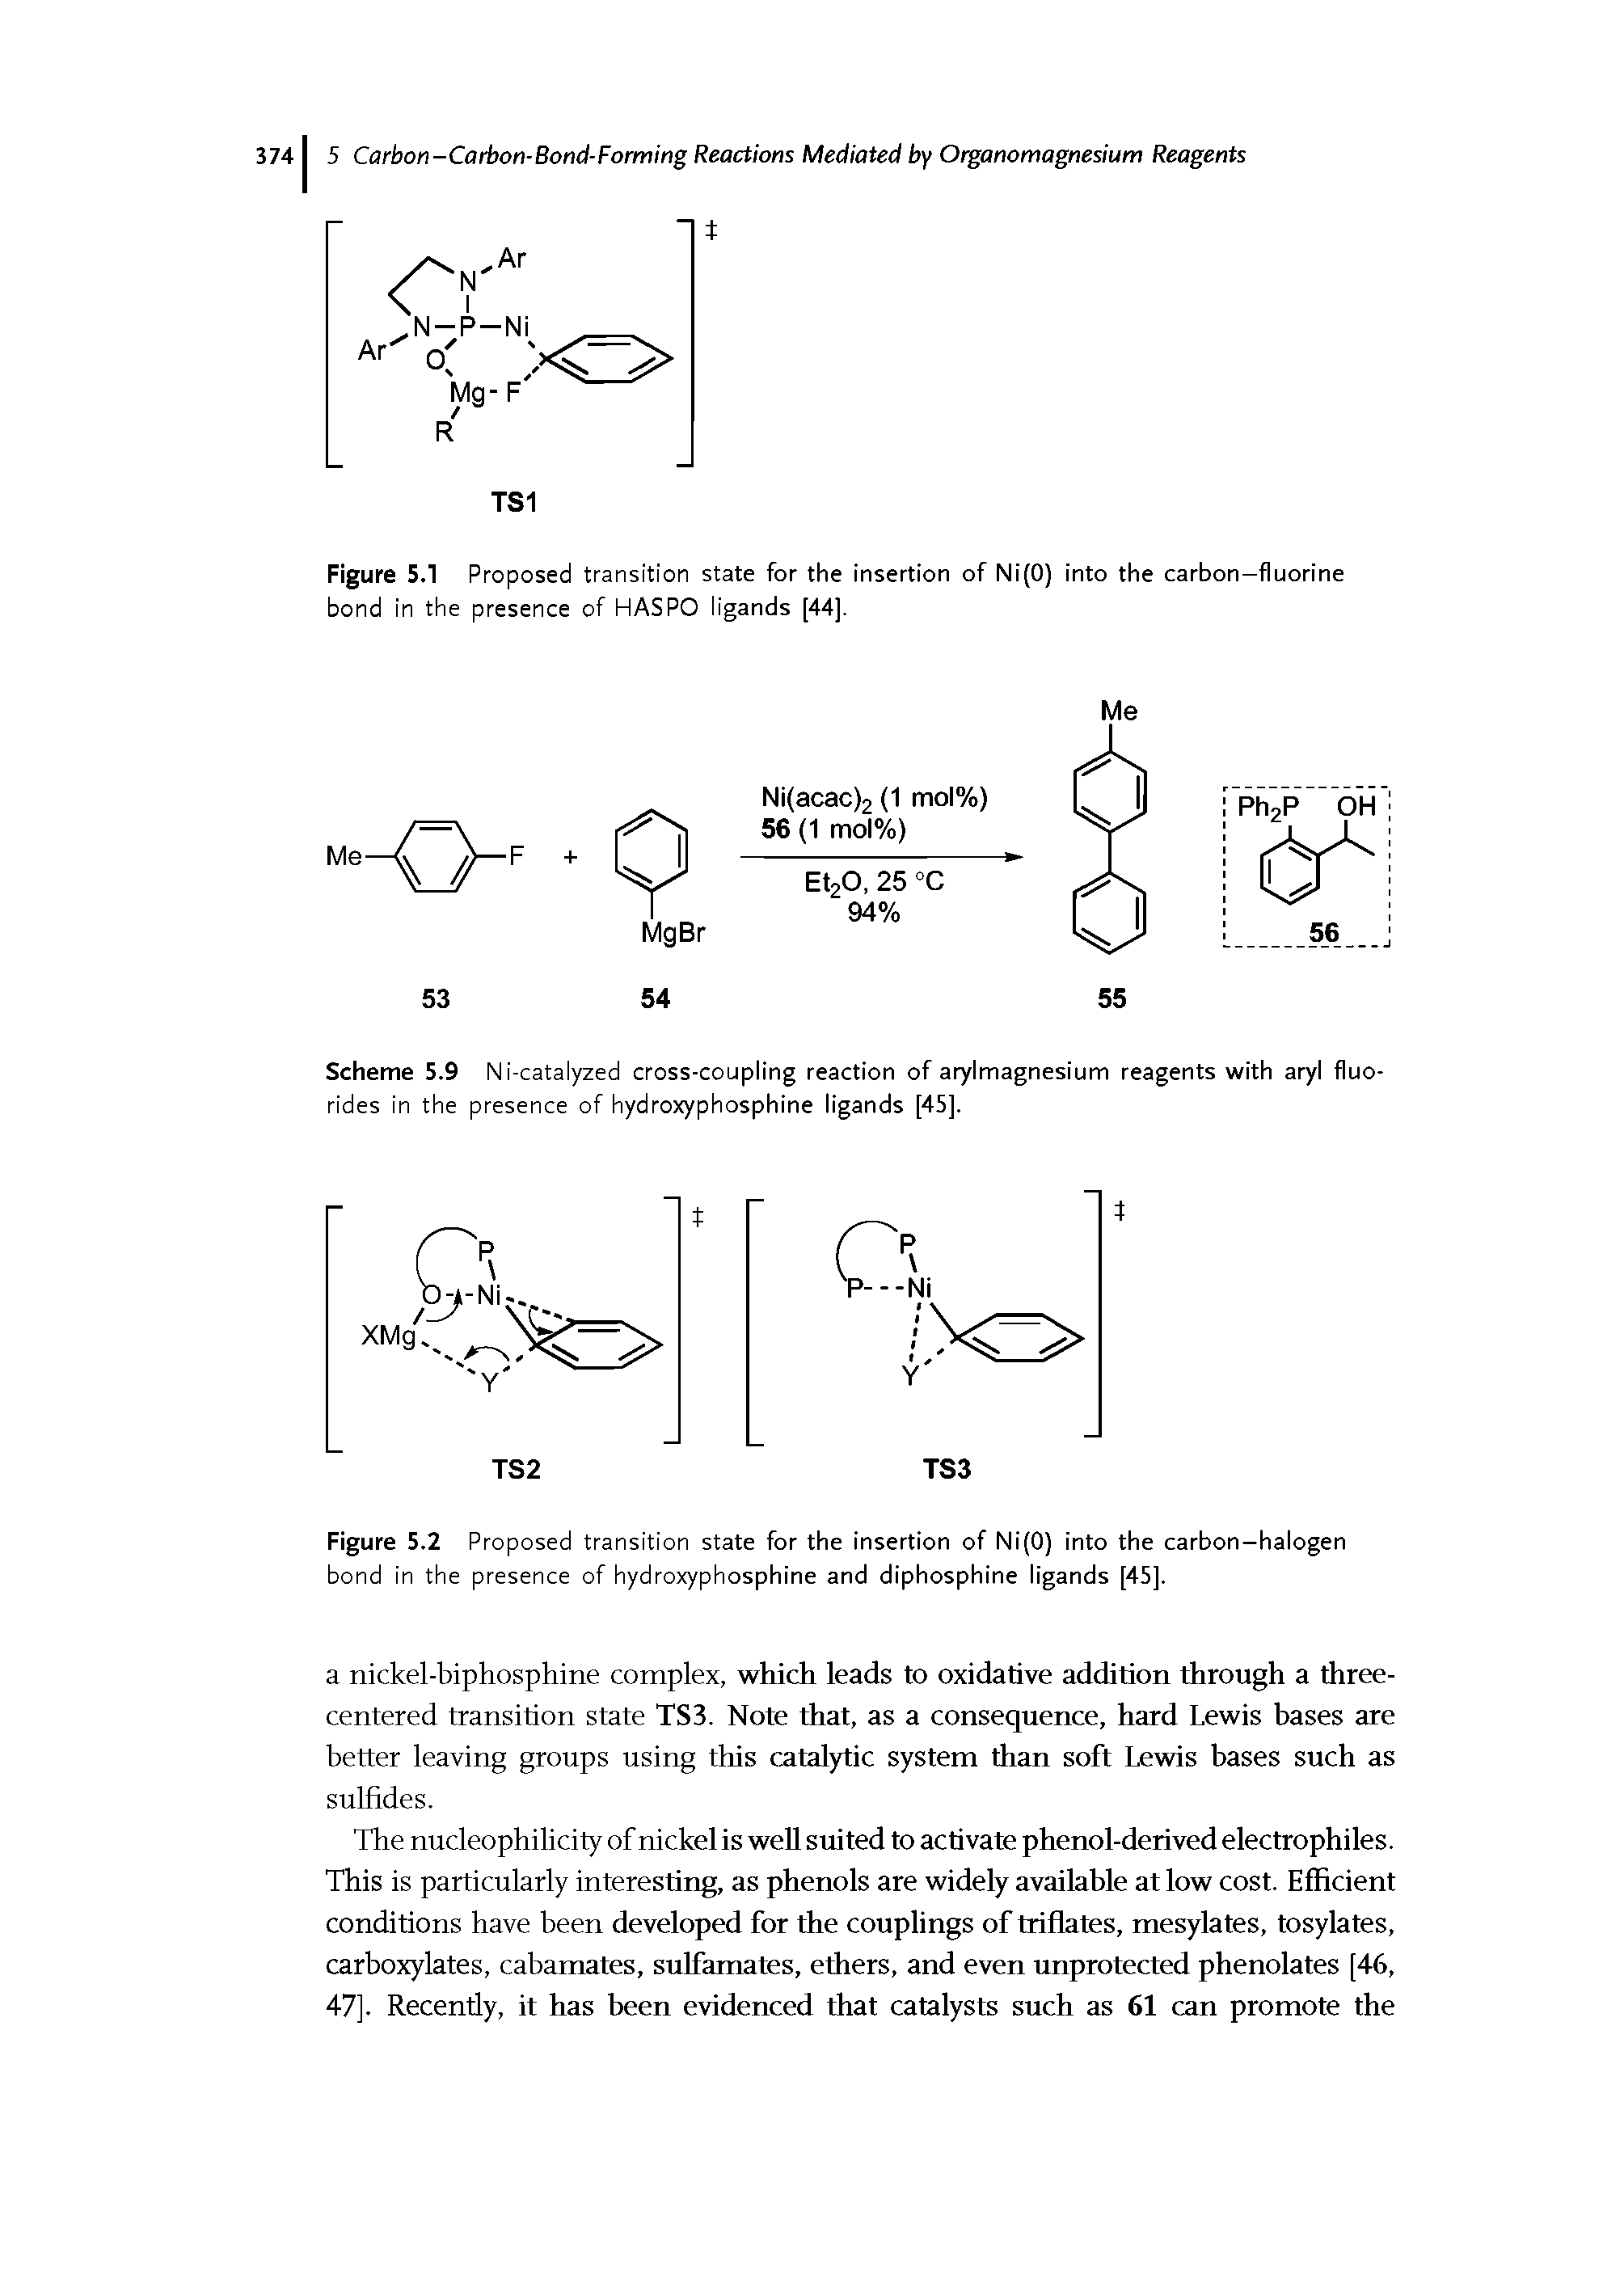 Figure 5.1 Proposed transition state for the insertion of Ni(0) into the carbon-fluorine bond in the presence of HASPO ligands [44].